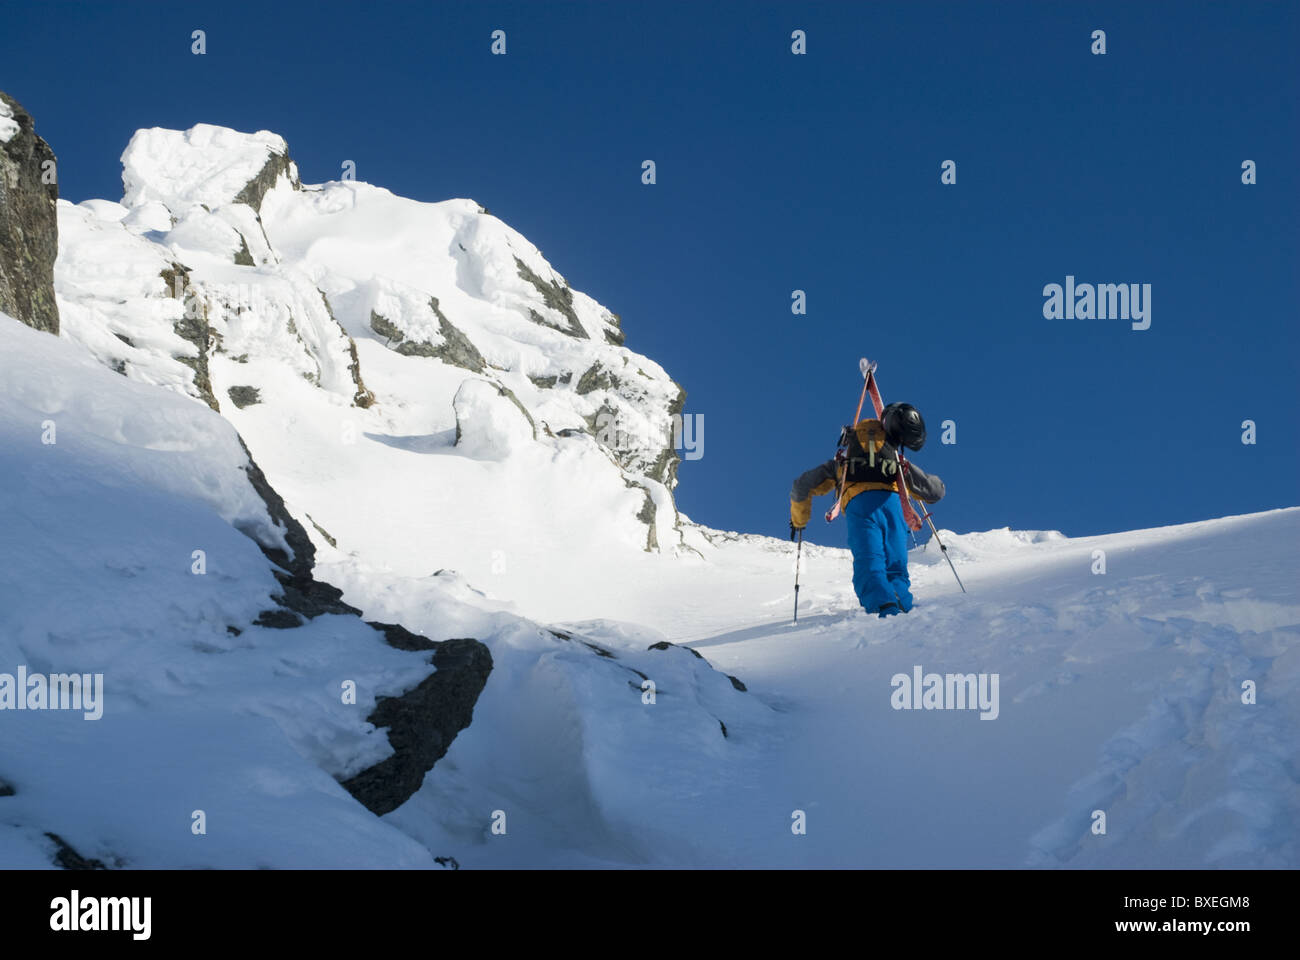 A free skier climbing up a snowy mountain side near Narvik, Norway Stock Photo